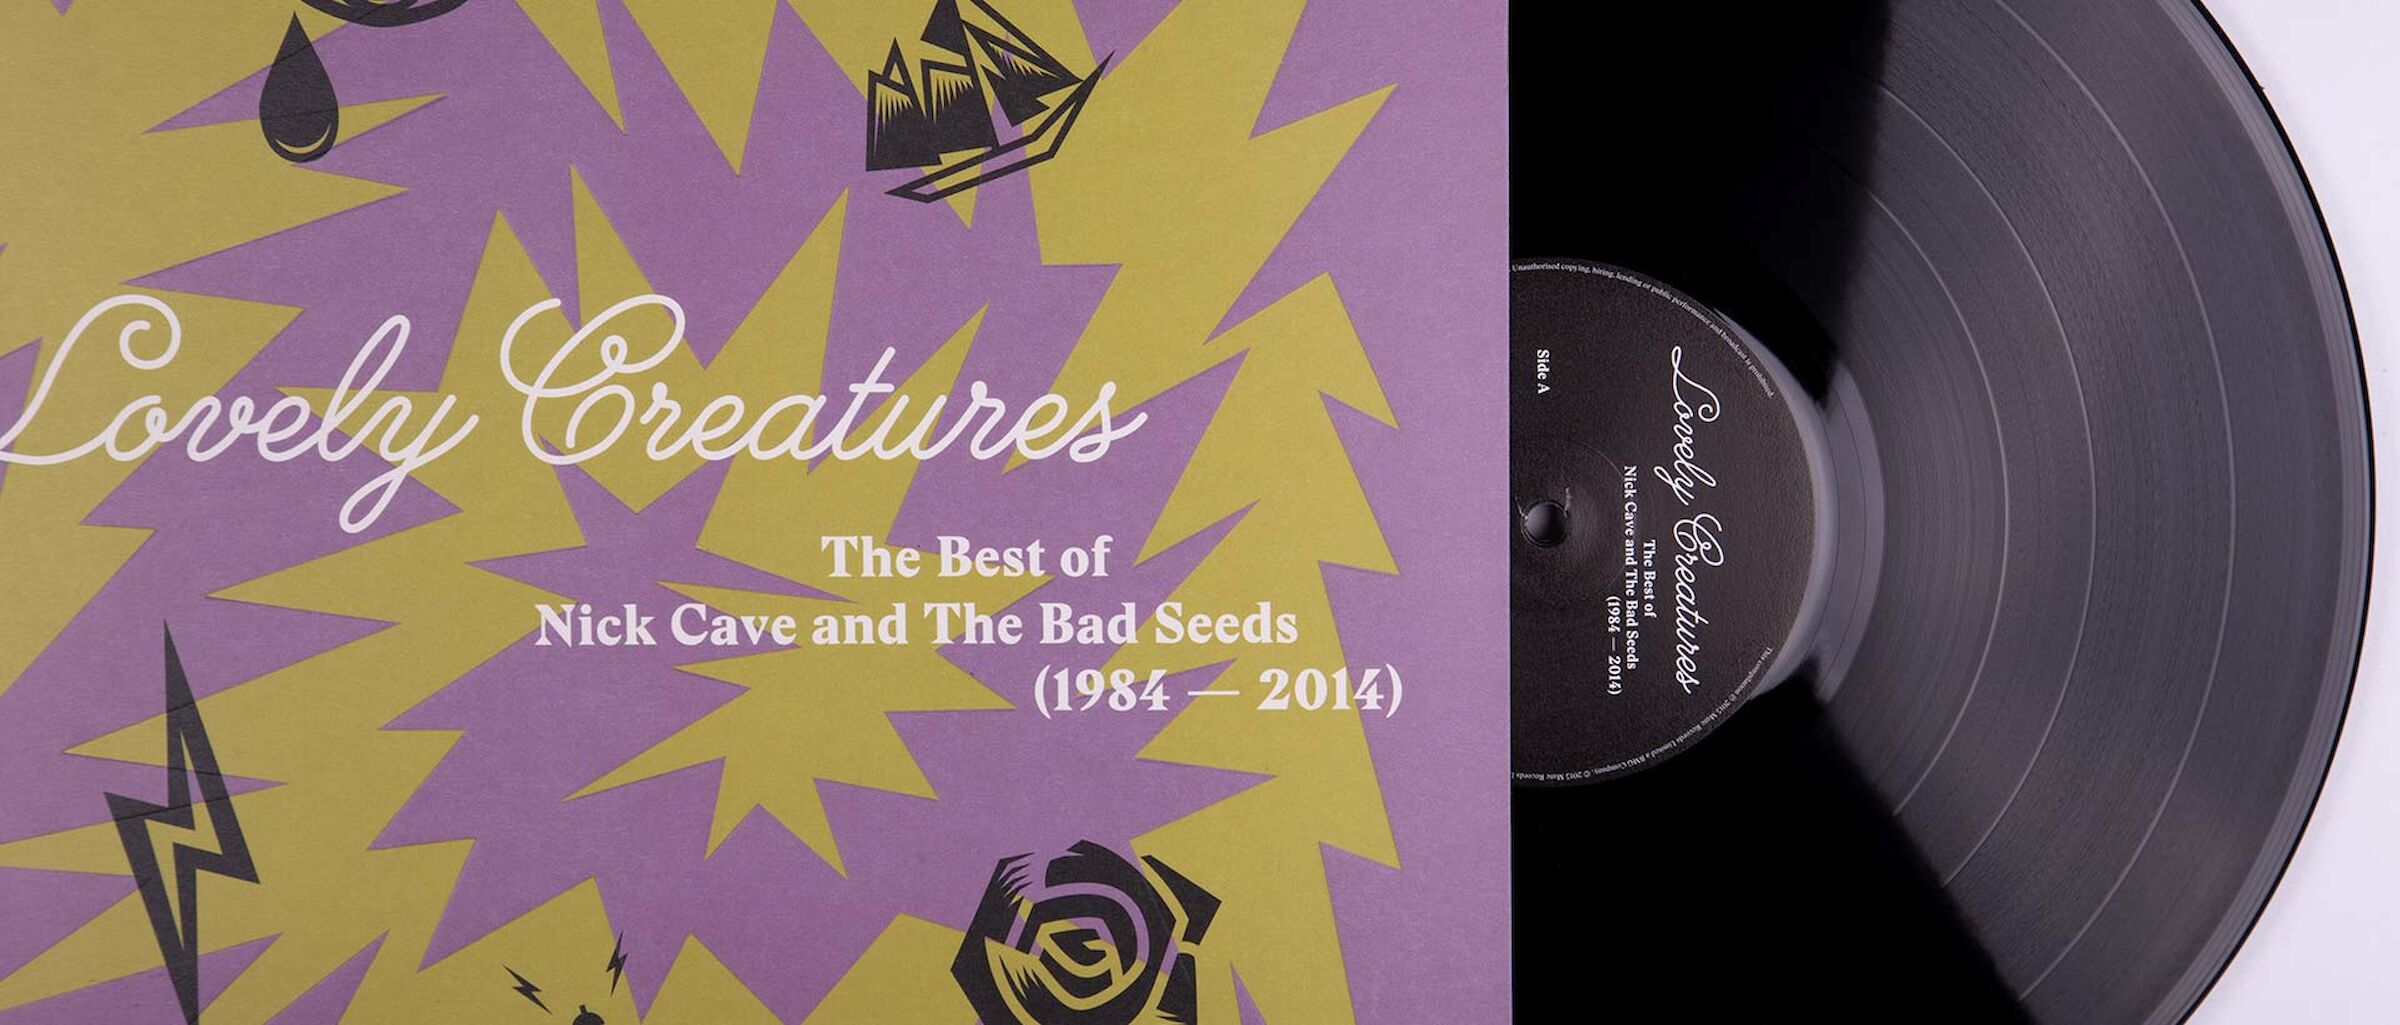 Nick Cave and The Bad Seeds - Lovely Creatures 12" vinyl record